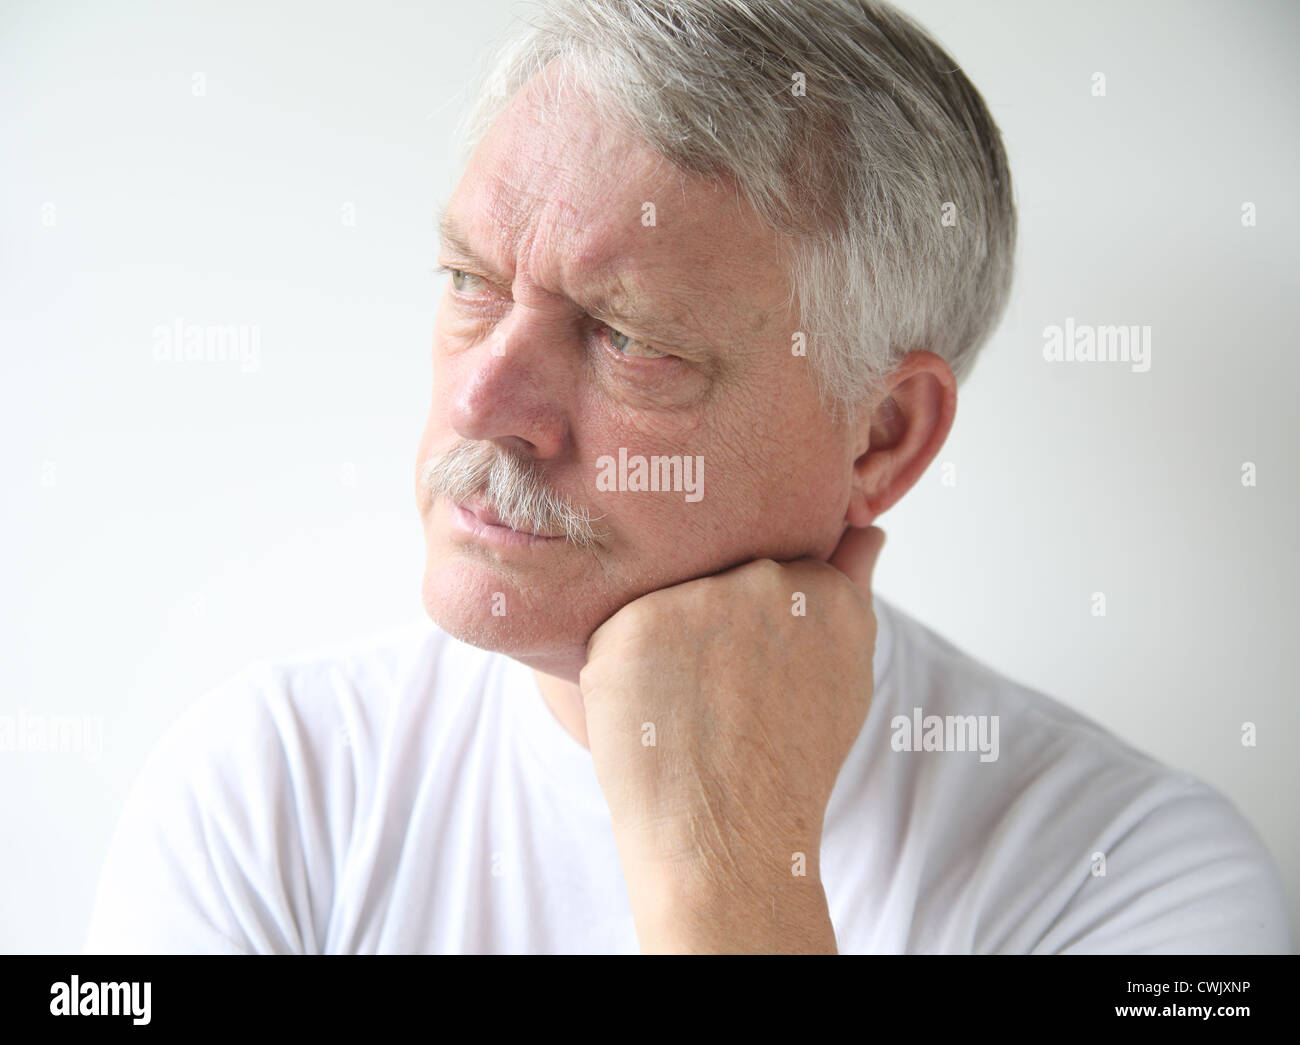 senior man with an irritated expression Stock Photo